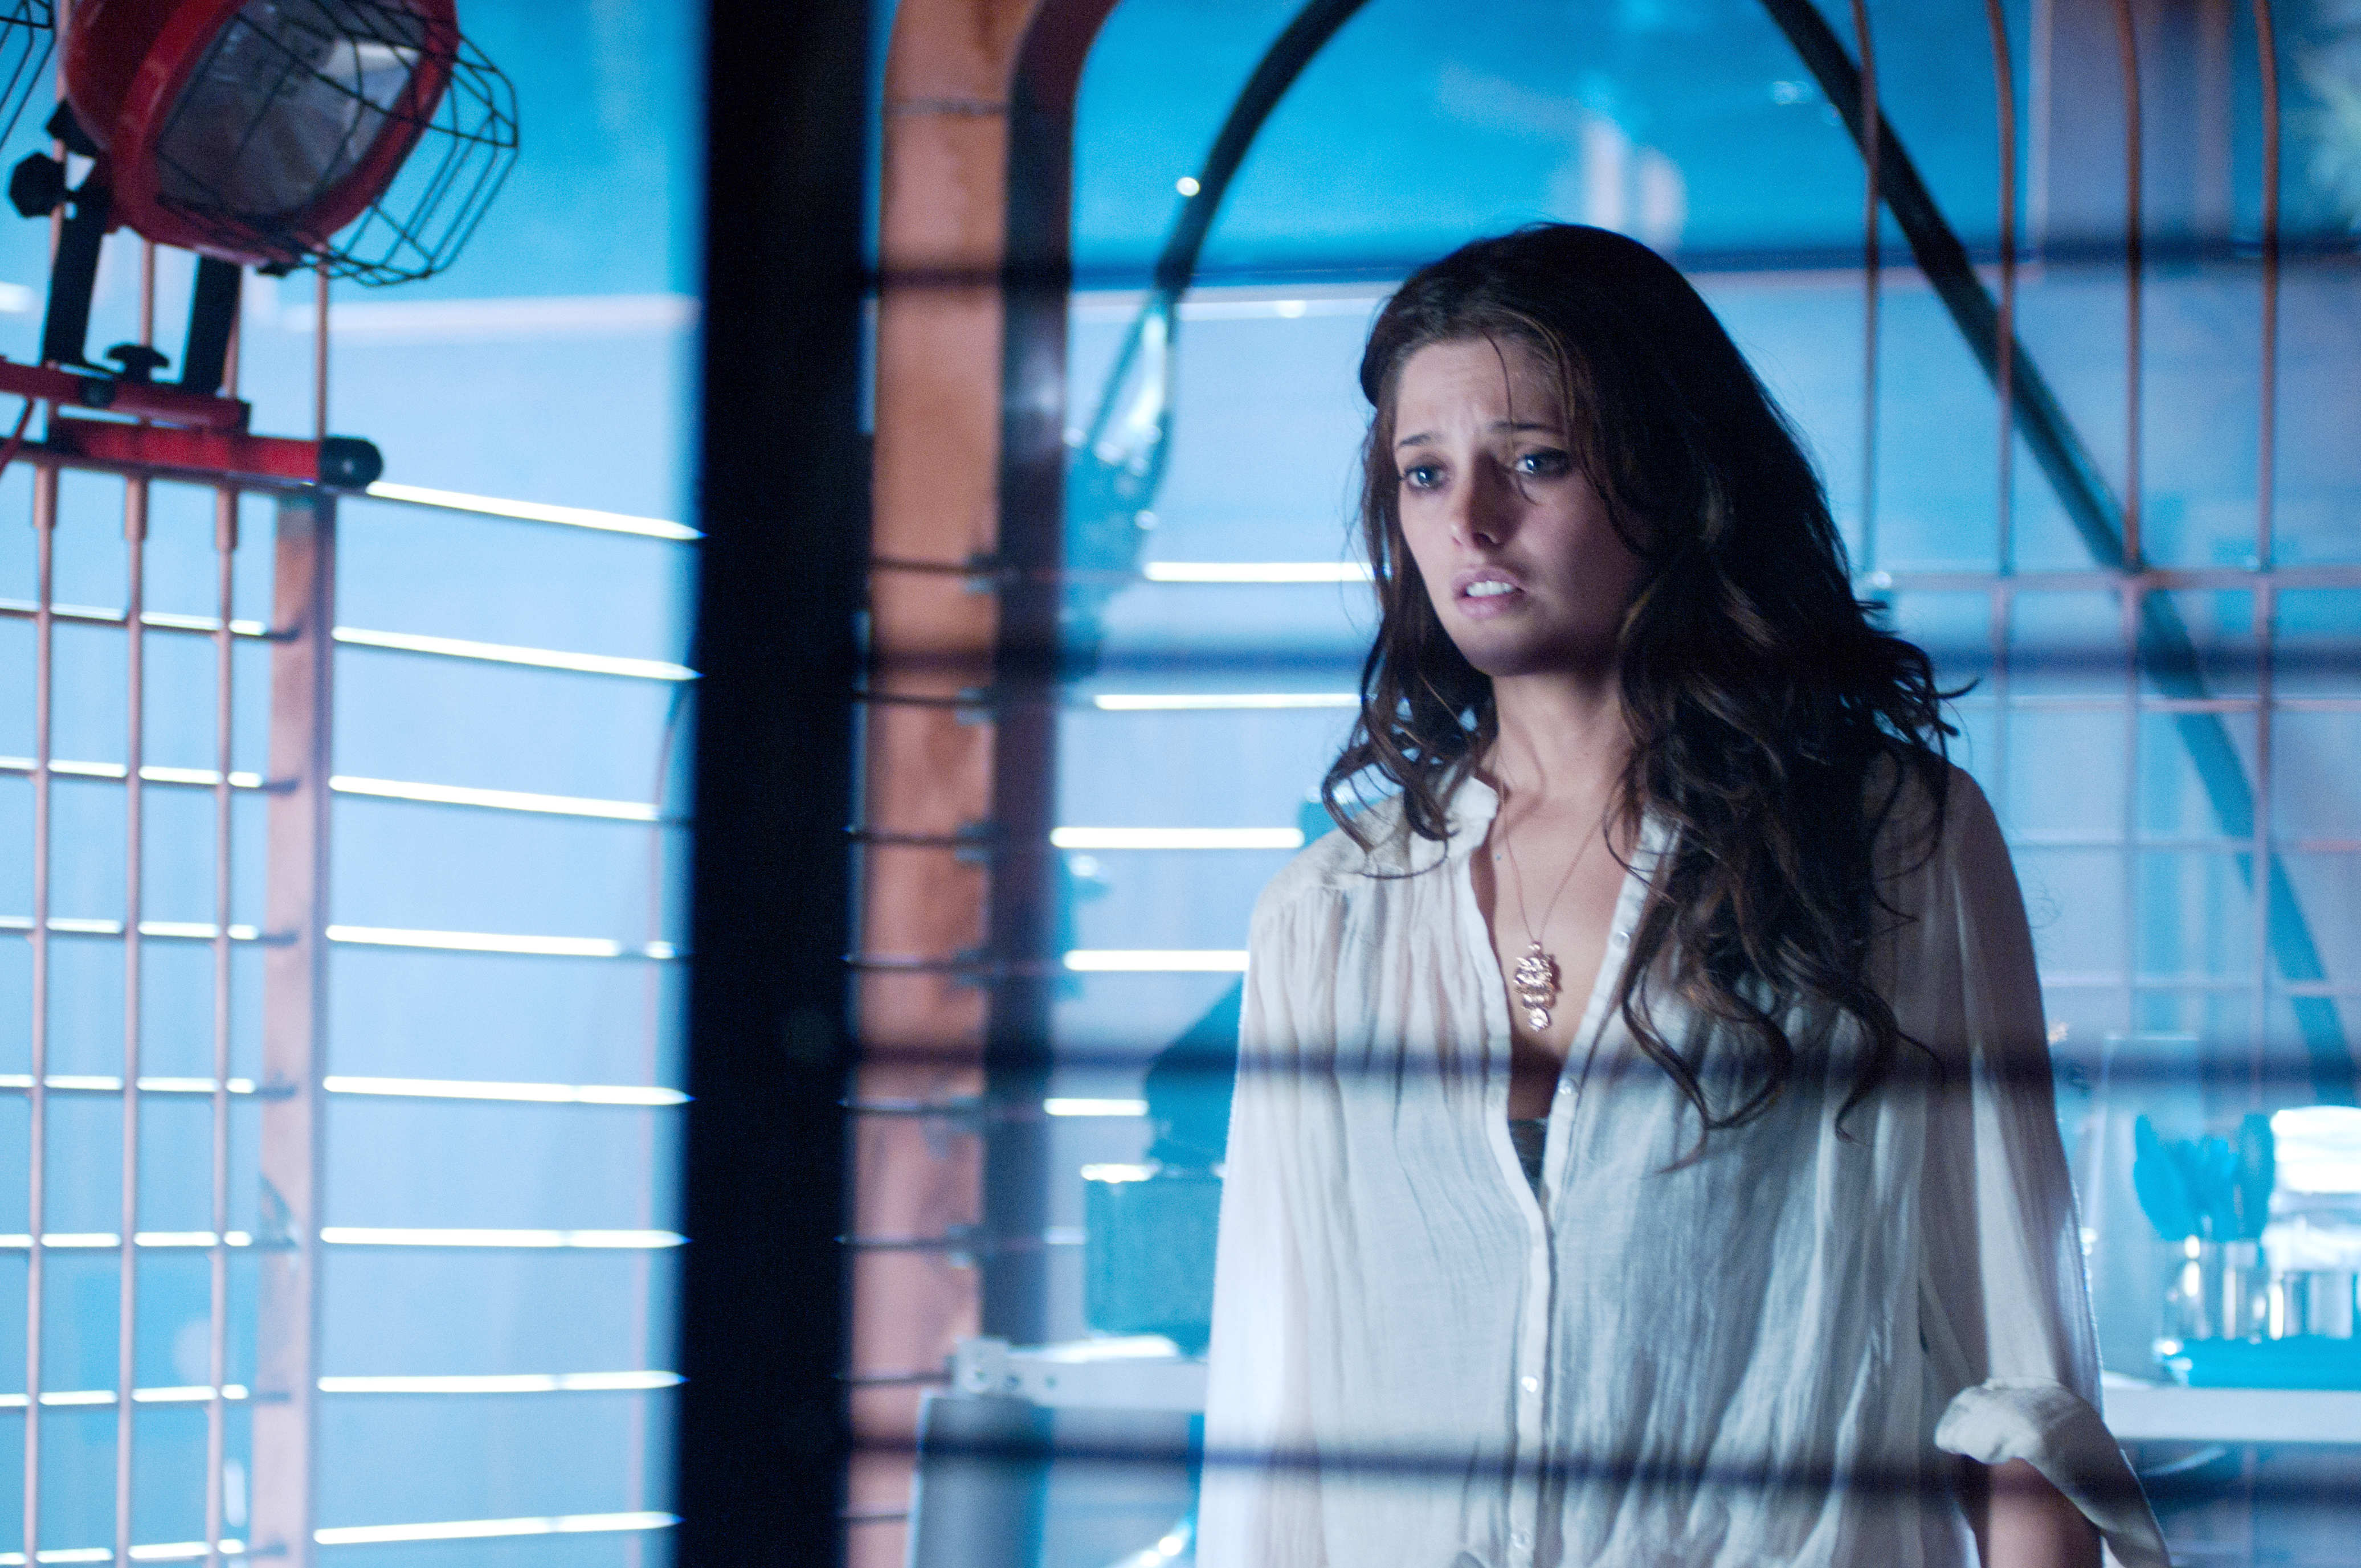 Ashley Greene stars as Kelly in Warner Bros. Pictures' The Apparition (2012)